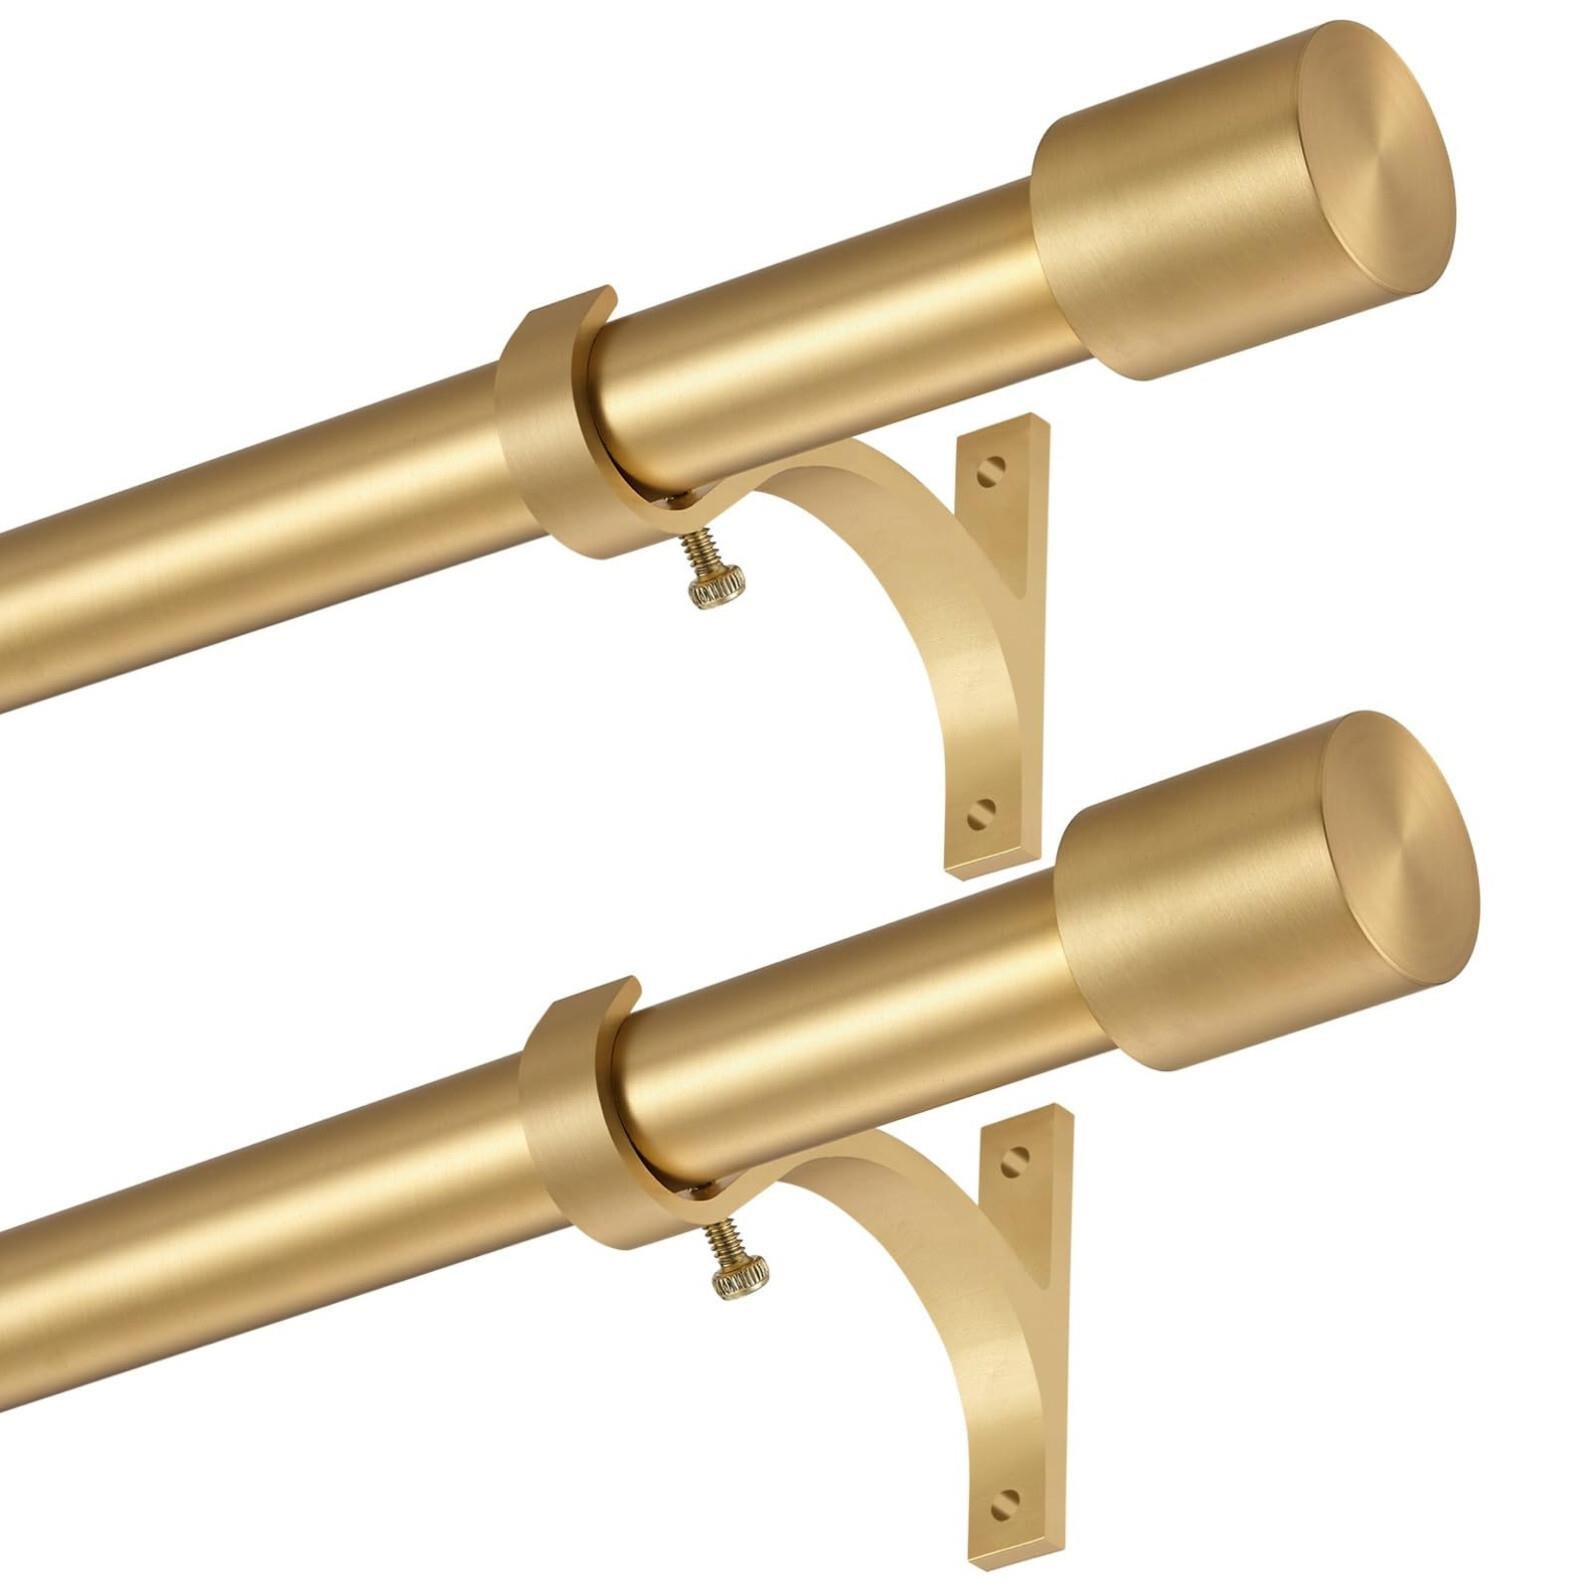 2 Pack Warm Gold Curtain Rods 36-72", Decorative